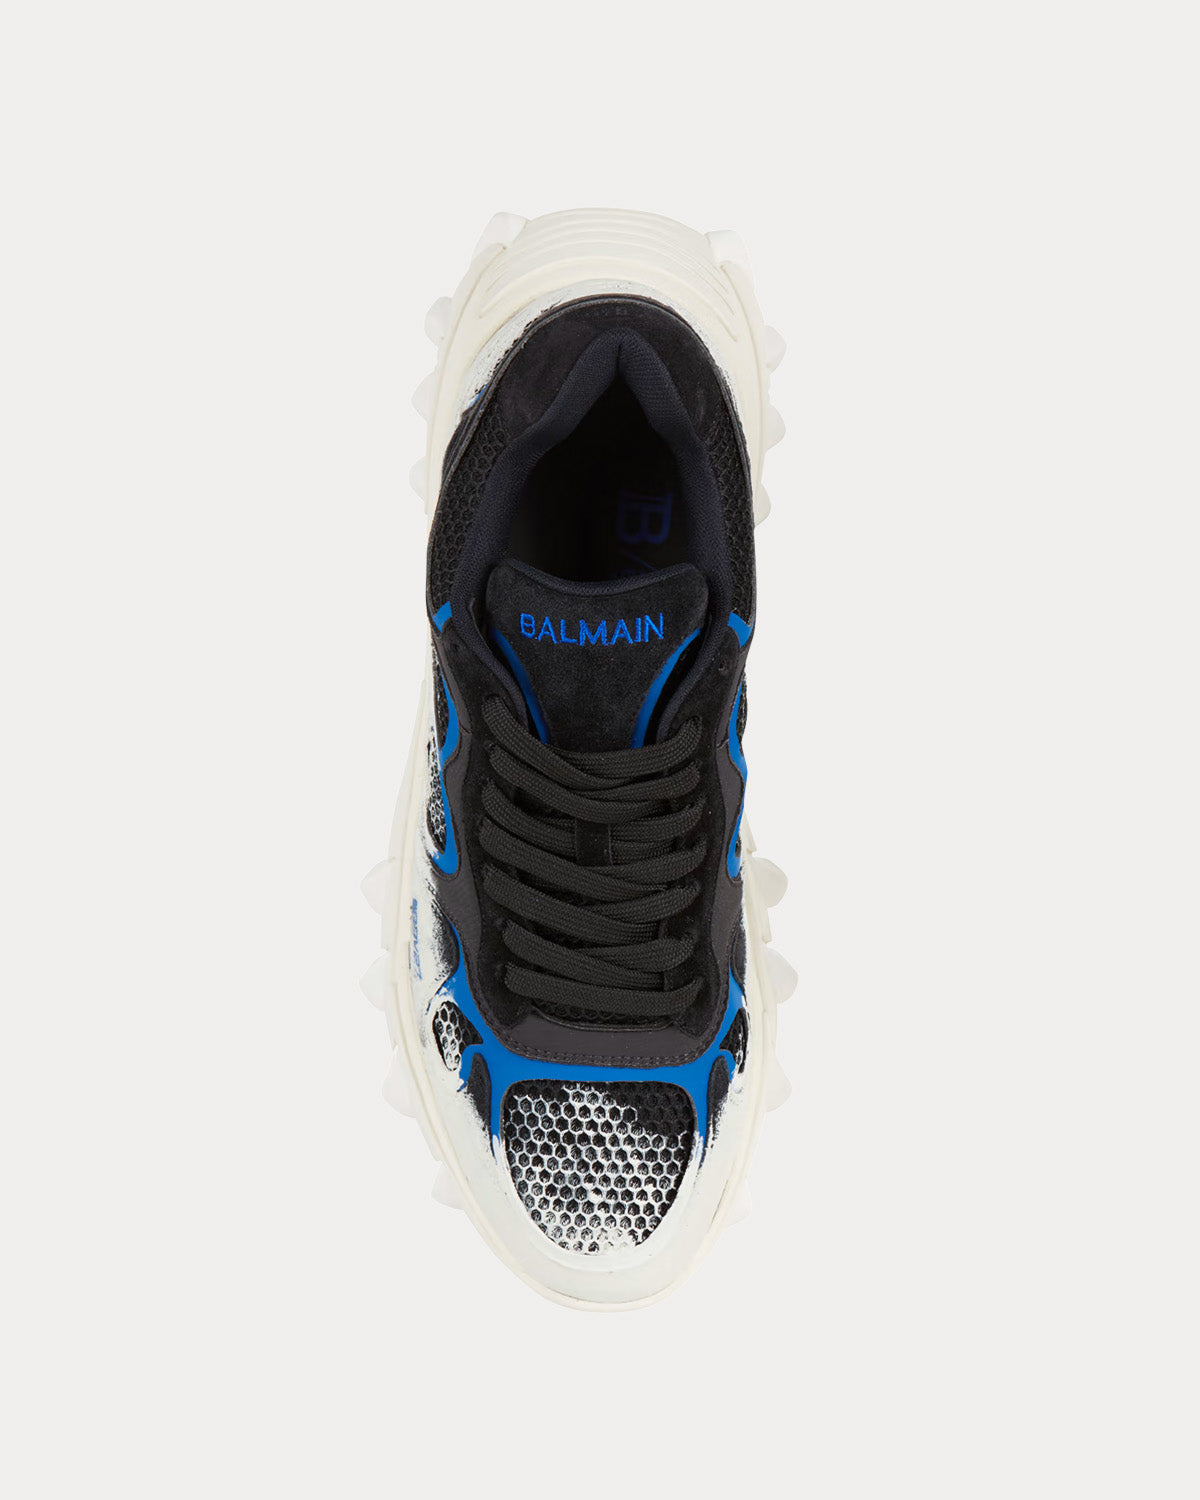 Balmain - B-East Leather, Suede & Mesh Black / Blue / White Low Top Sneakers